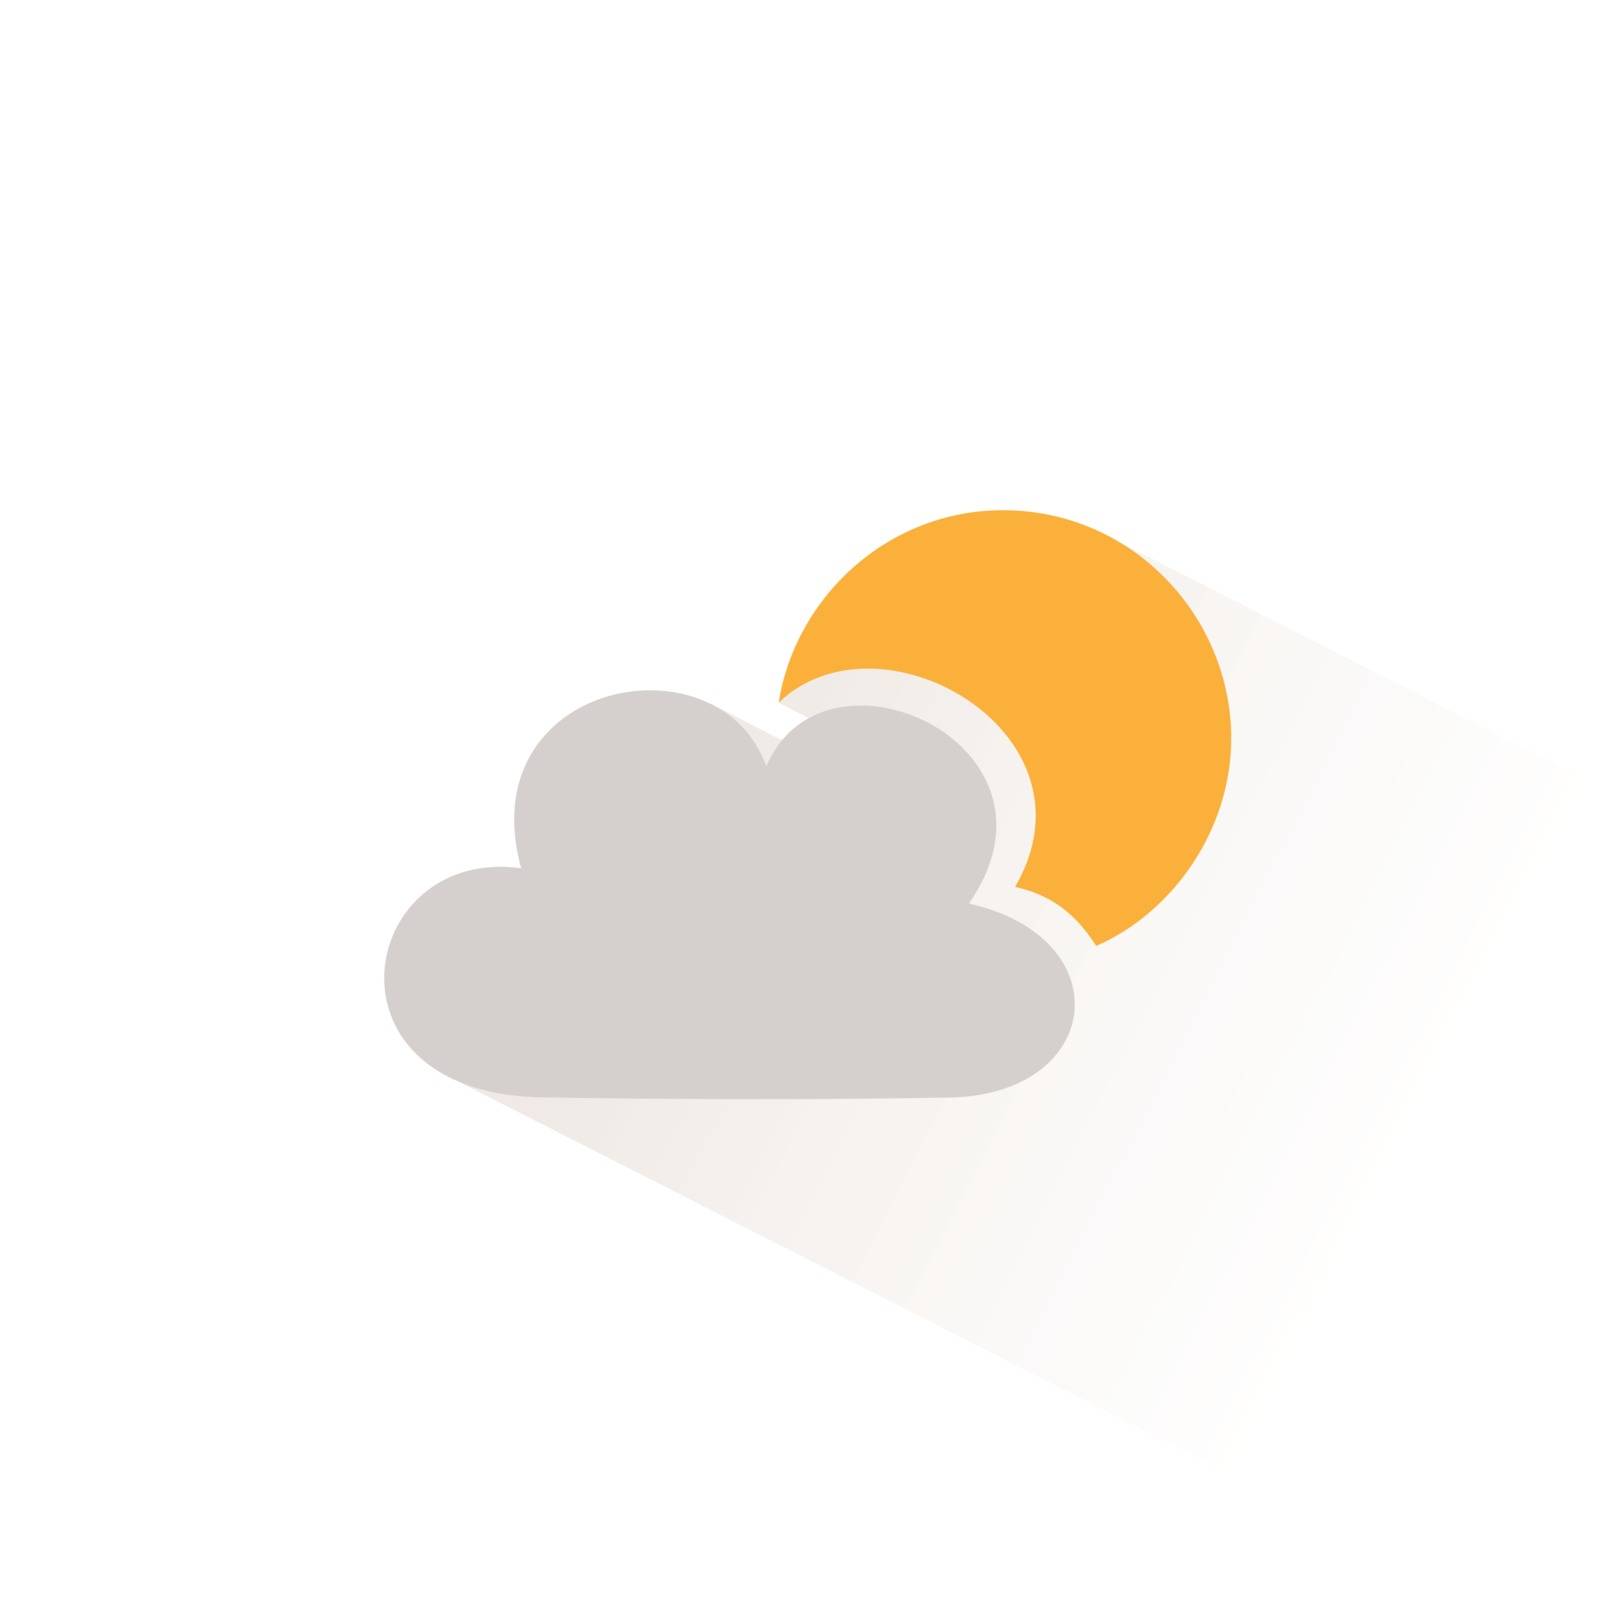 Sun and cloud color icon with shadow. Flat vector illustration